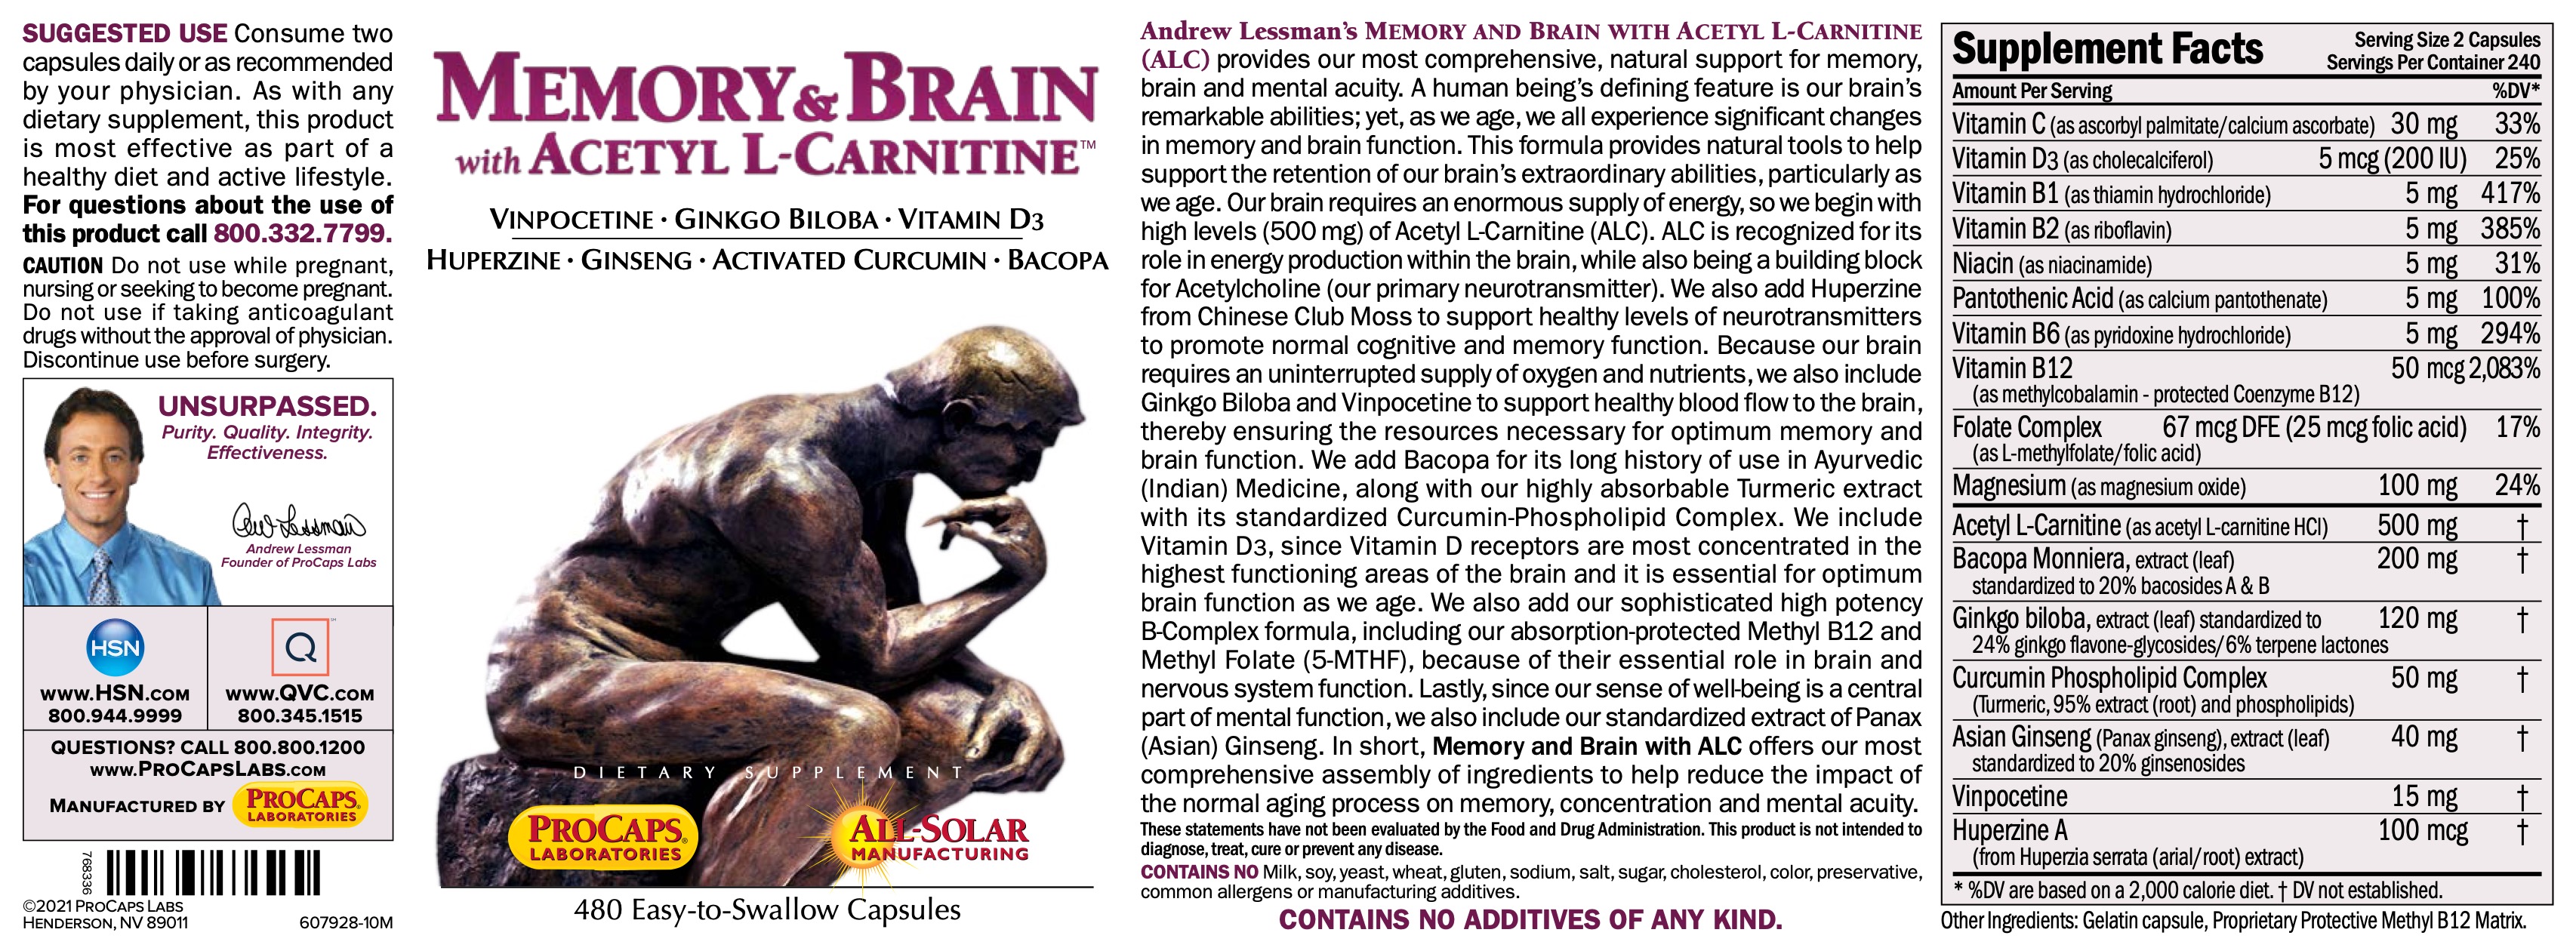 Memory-And-Brain-with-Acetyl-L-Carnitine-Capsules-Nervous-System-Support